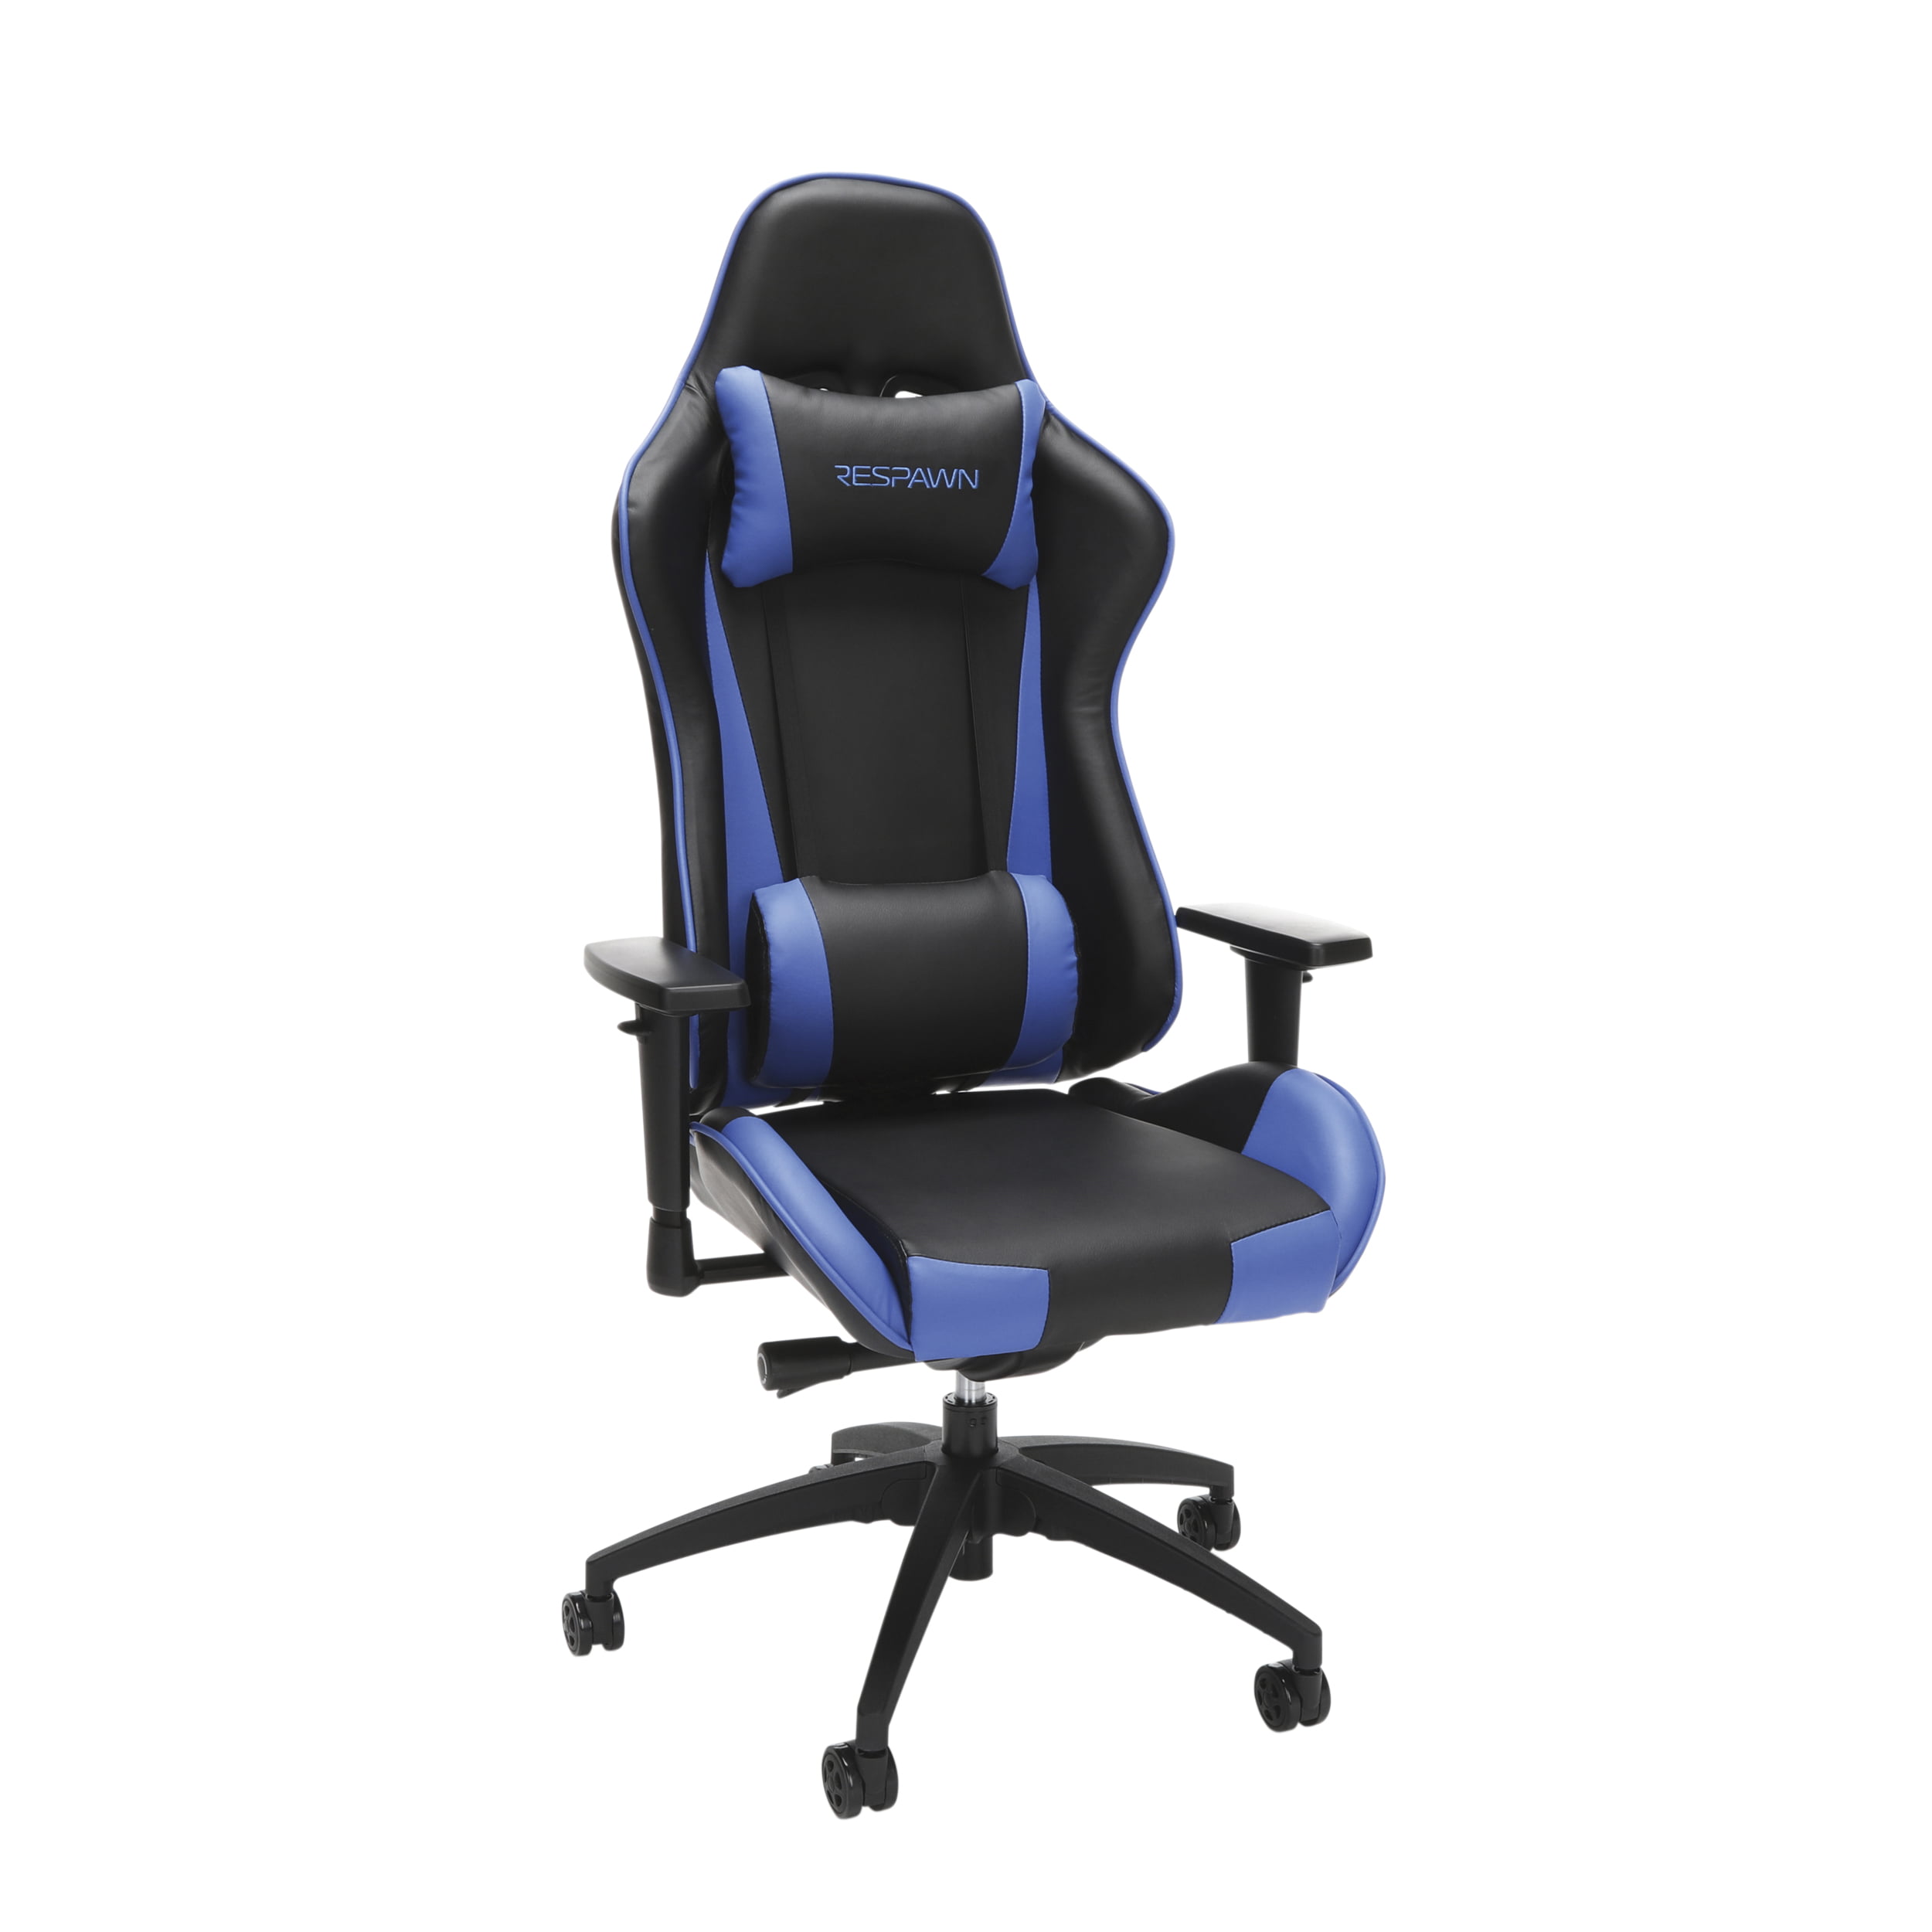 RESPAWN 105 Racing Style Gaming Chair, in Blue (RSP105